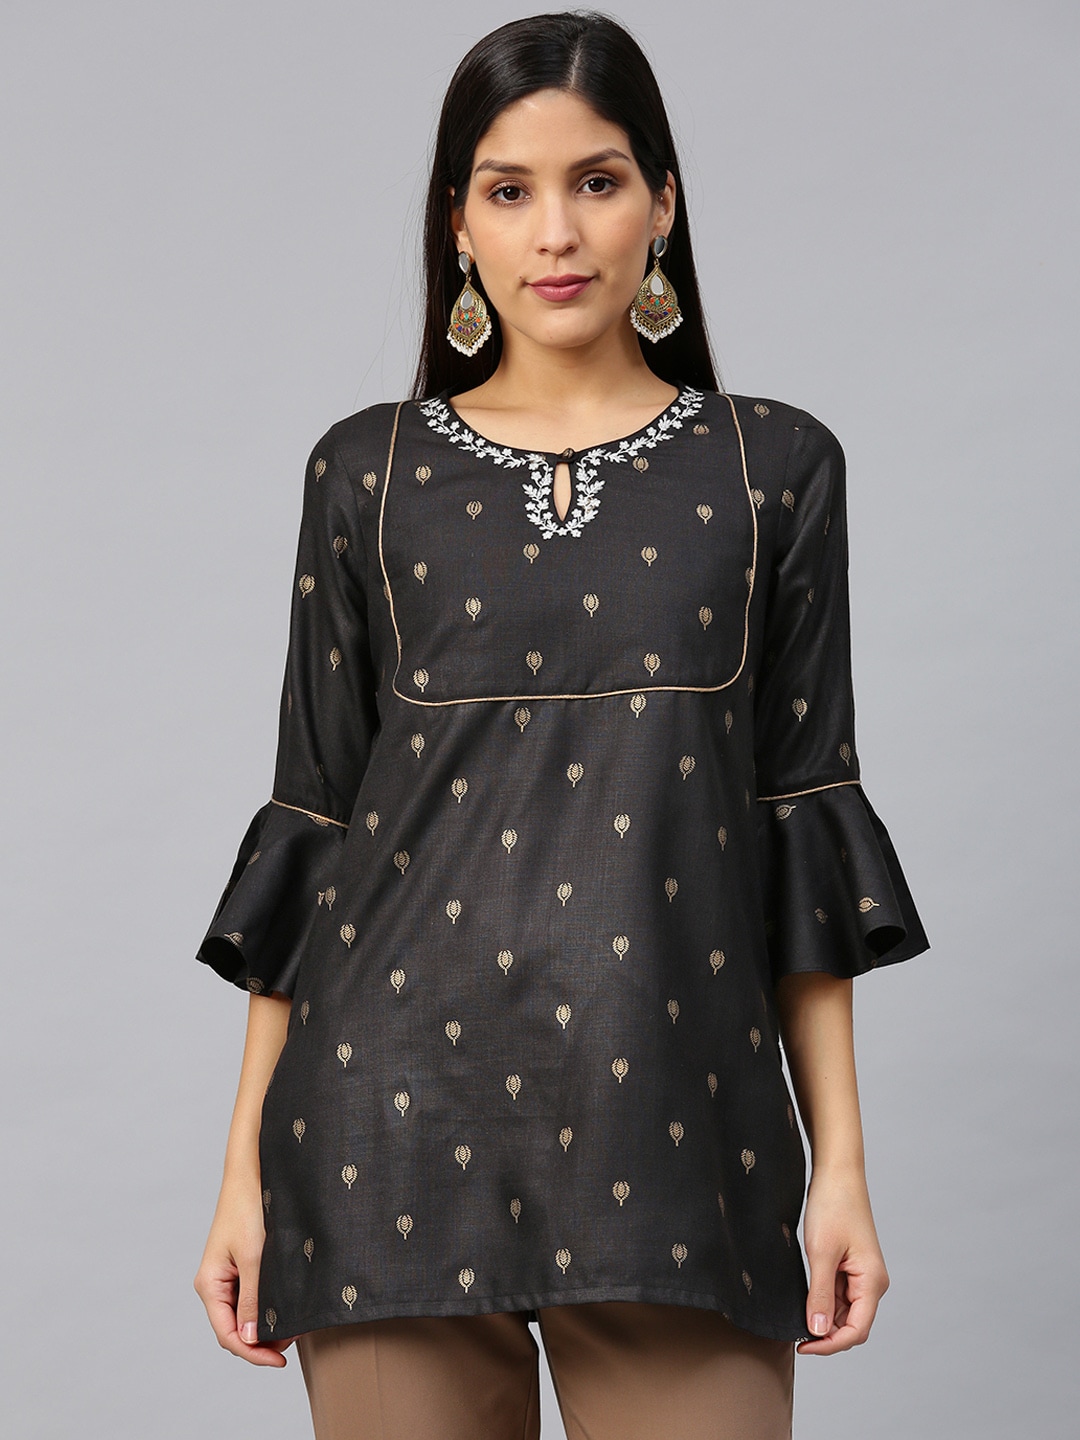 Bhama Couture Women Black & Golden Printed Pure Cotton Straight Kurti Price in India